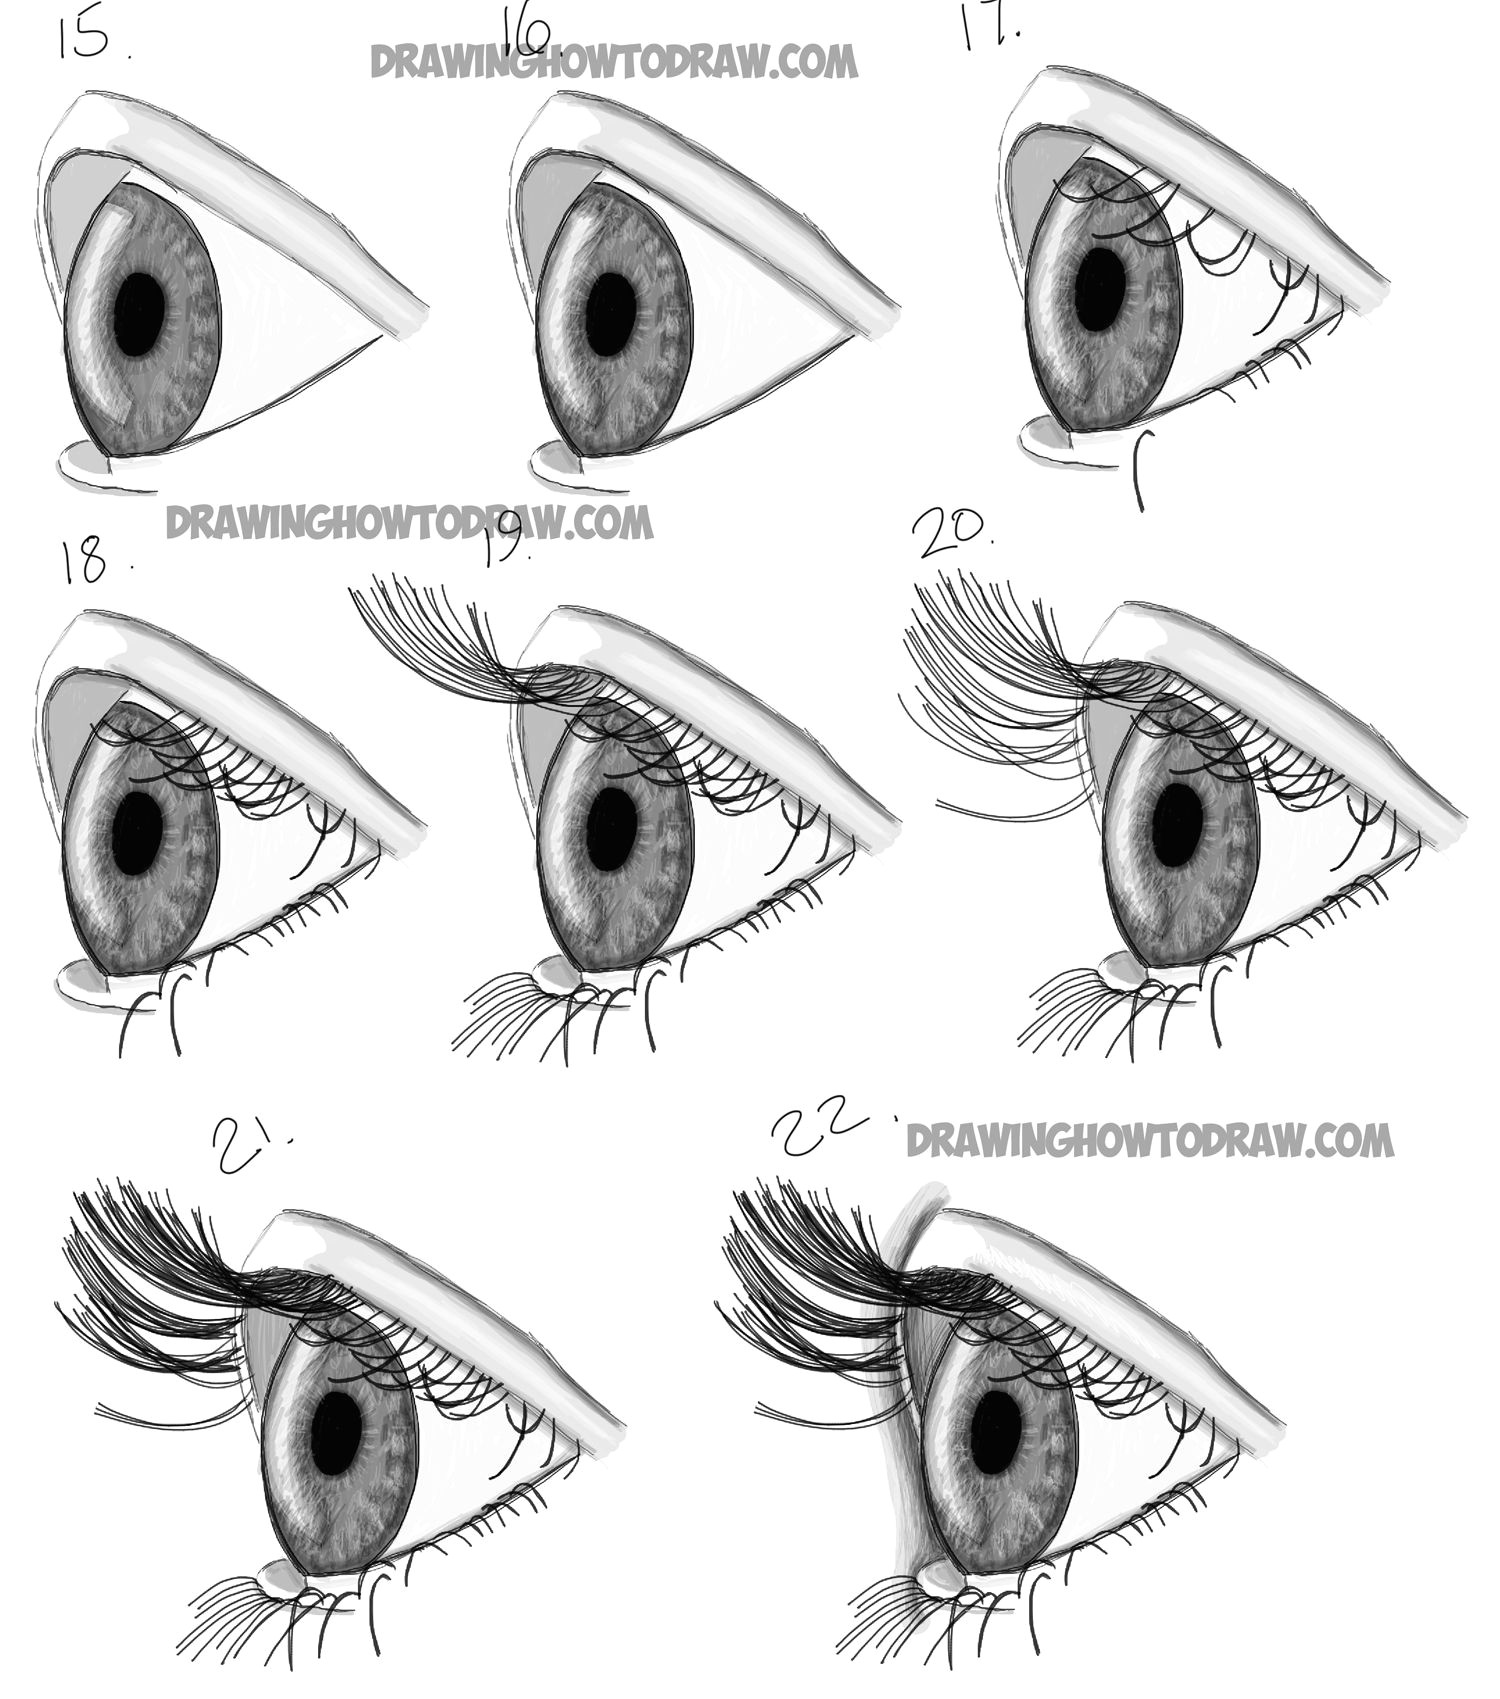 An Eye Drawing Simple How to Draw Realistic Eyes From the Side Profile View Step by Step